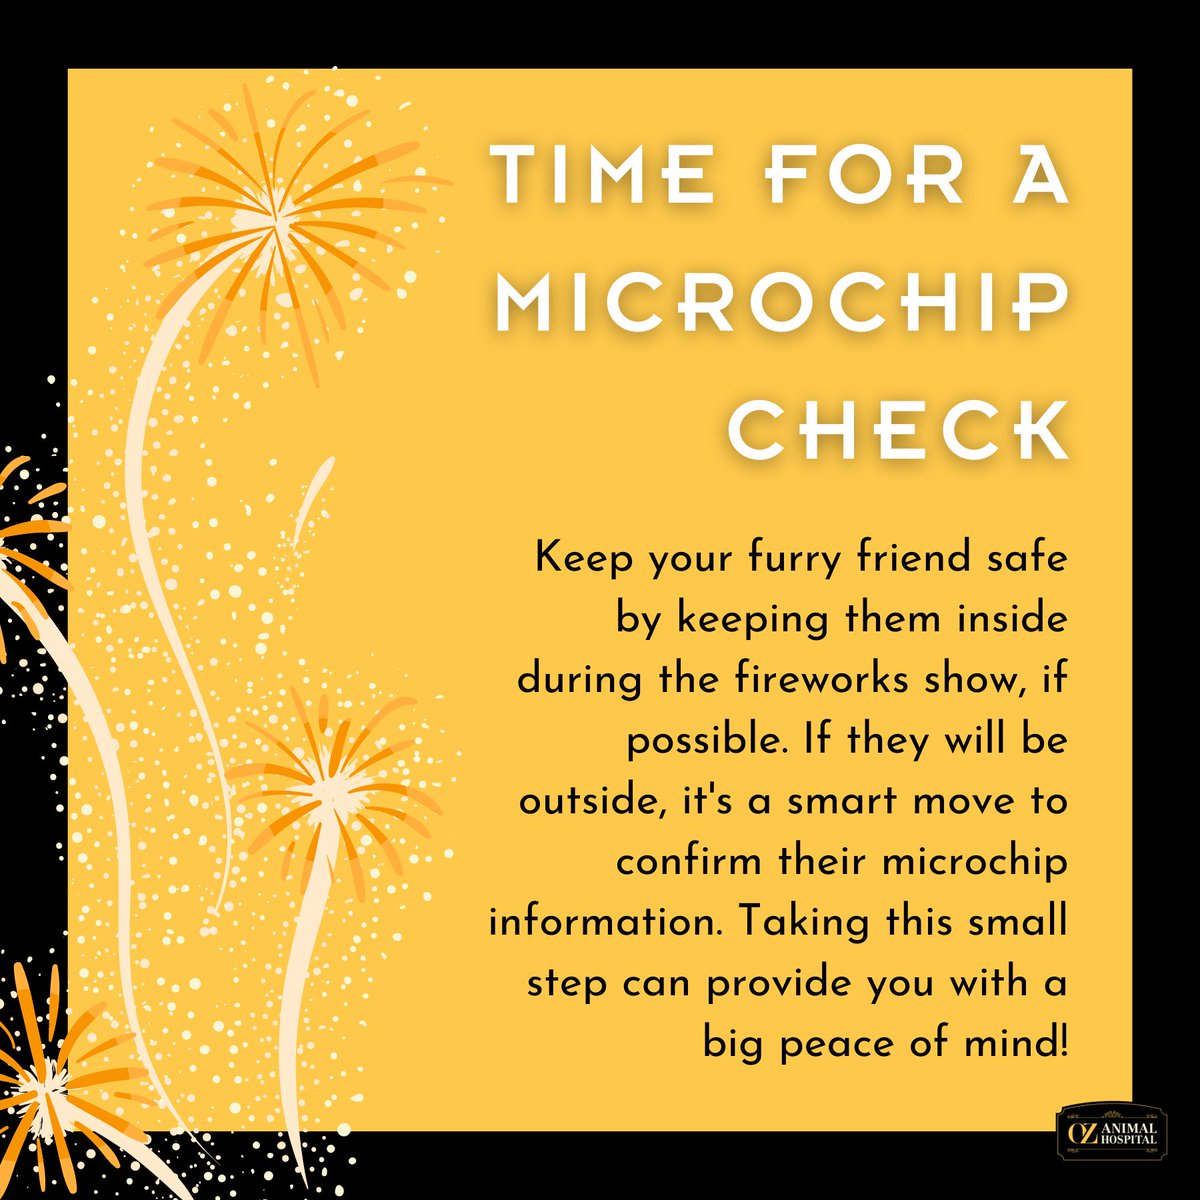 Fireworks can be scary for our furry friends. Keep them safe by keeping them inside during the show. If they will be outside, make sure their microchip information is up to date. 🎇#FireworksSafety #PetSafetyTips